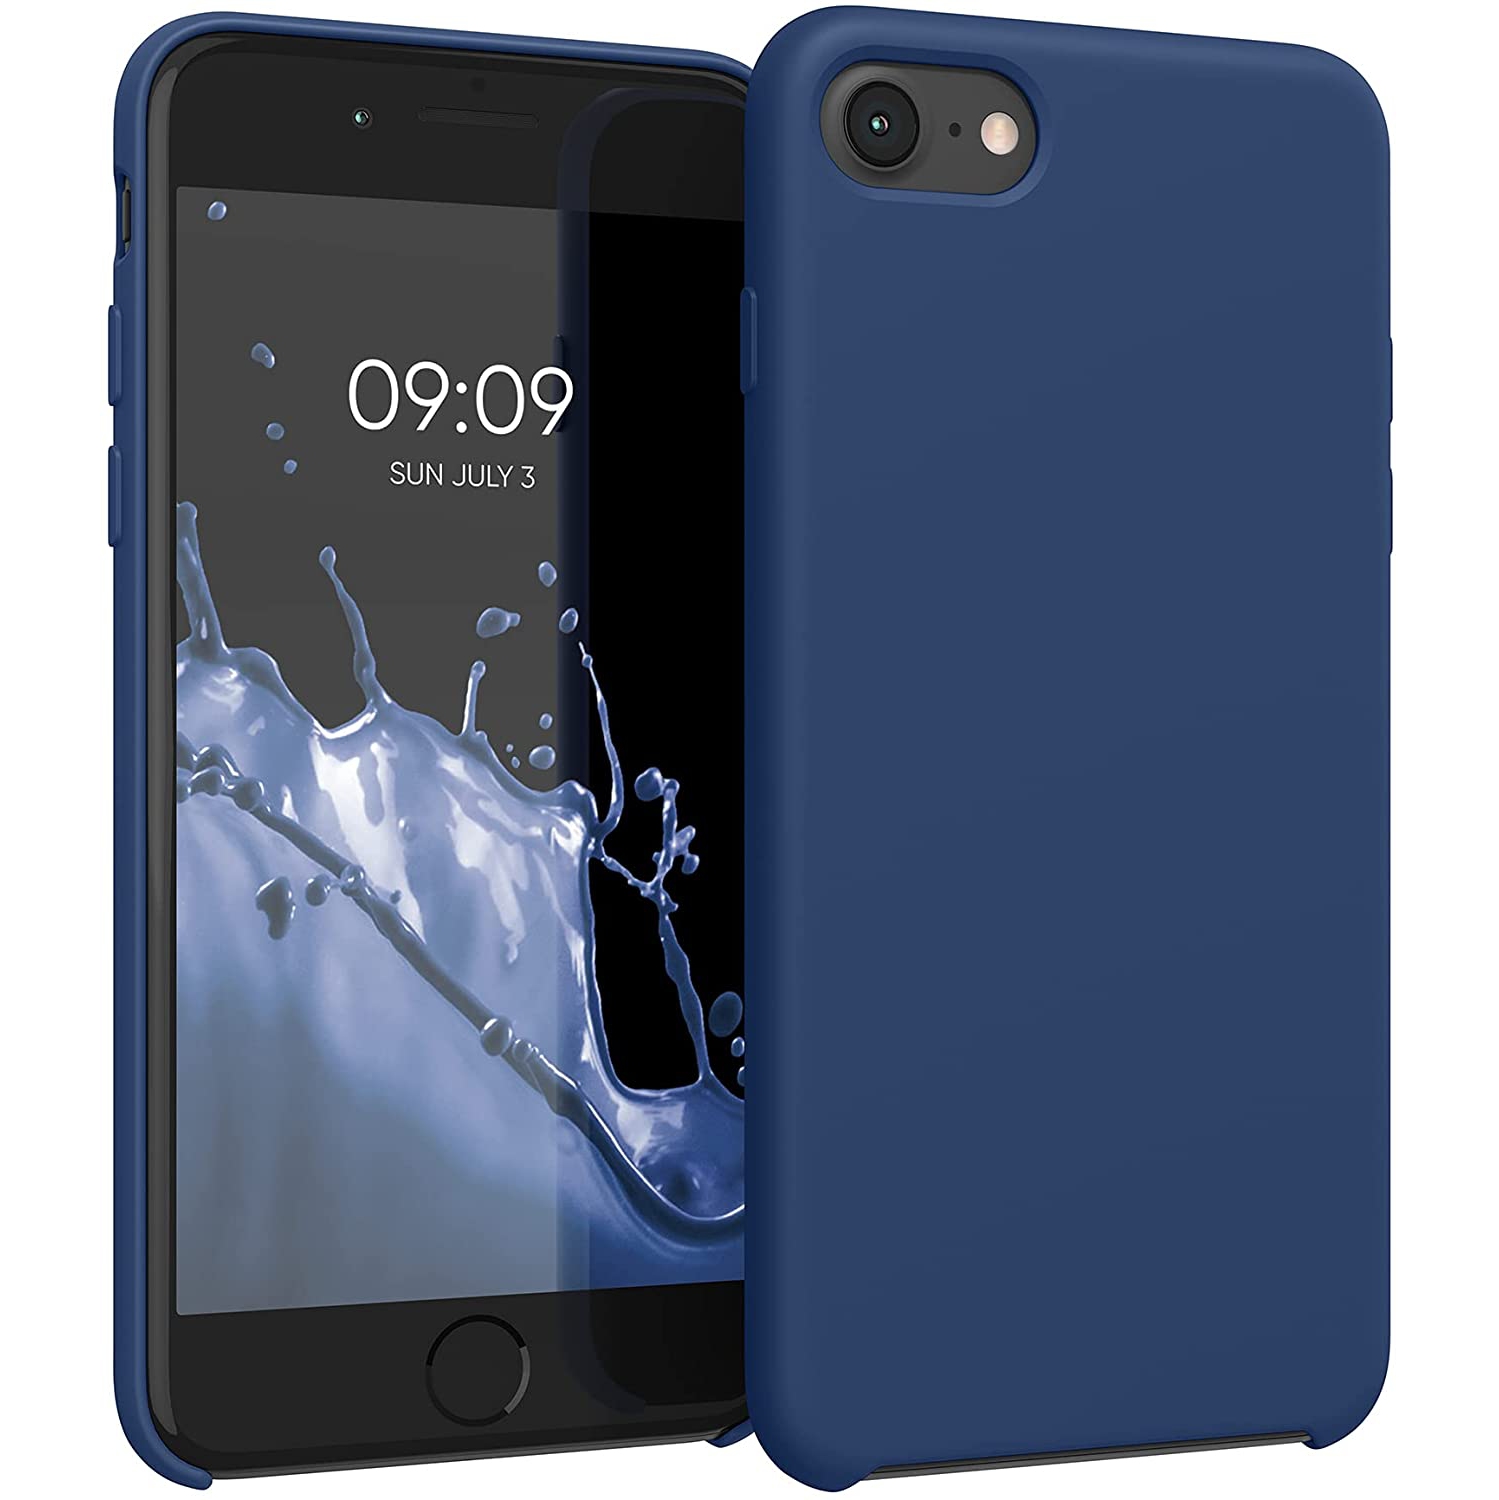 TPU Silicone Case Compatible with Apple iPhone 7/8 / SE (2020) - Case Slim Phone Cover with Soft Finish - Navy